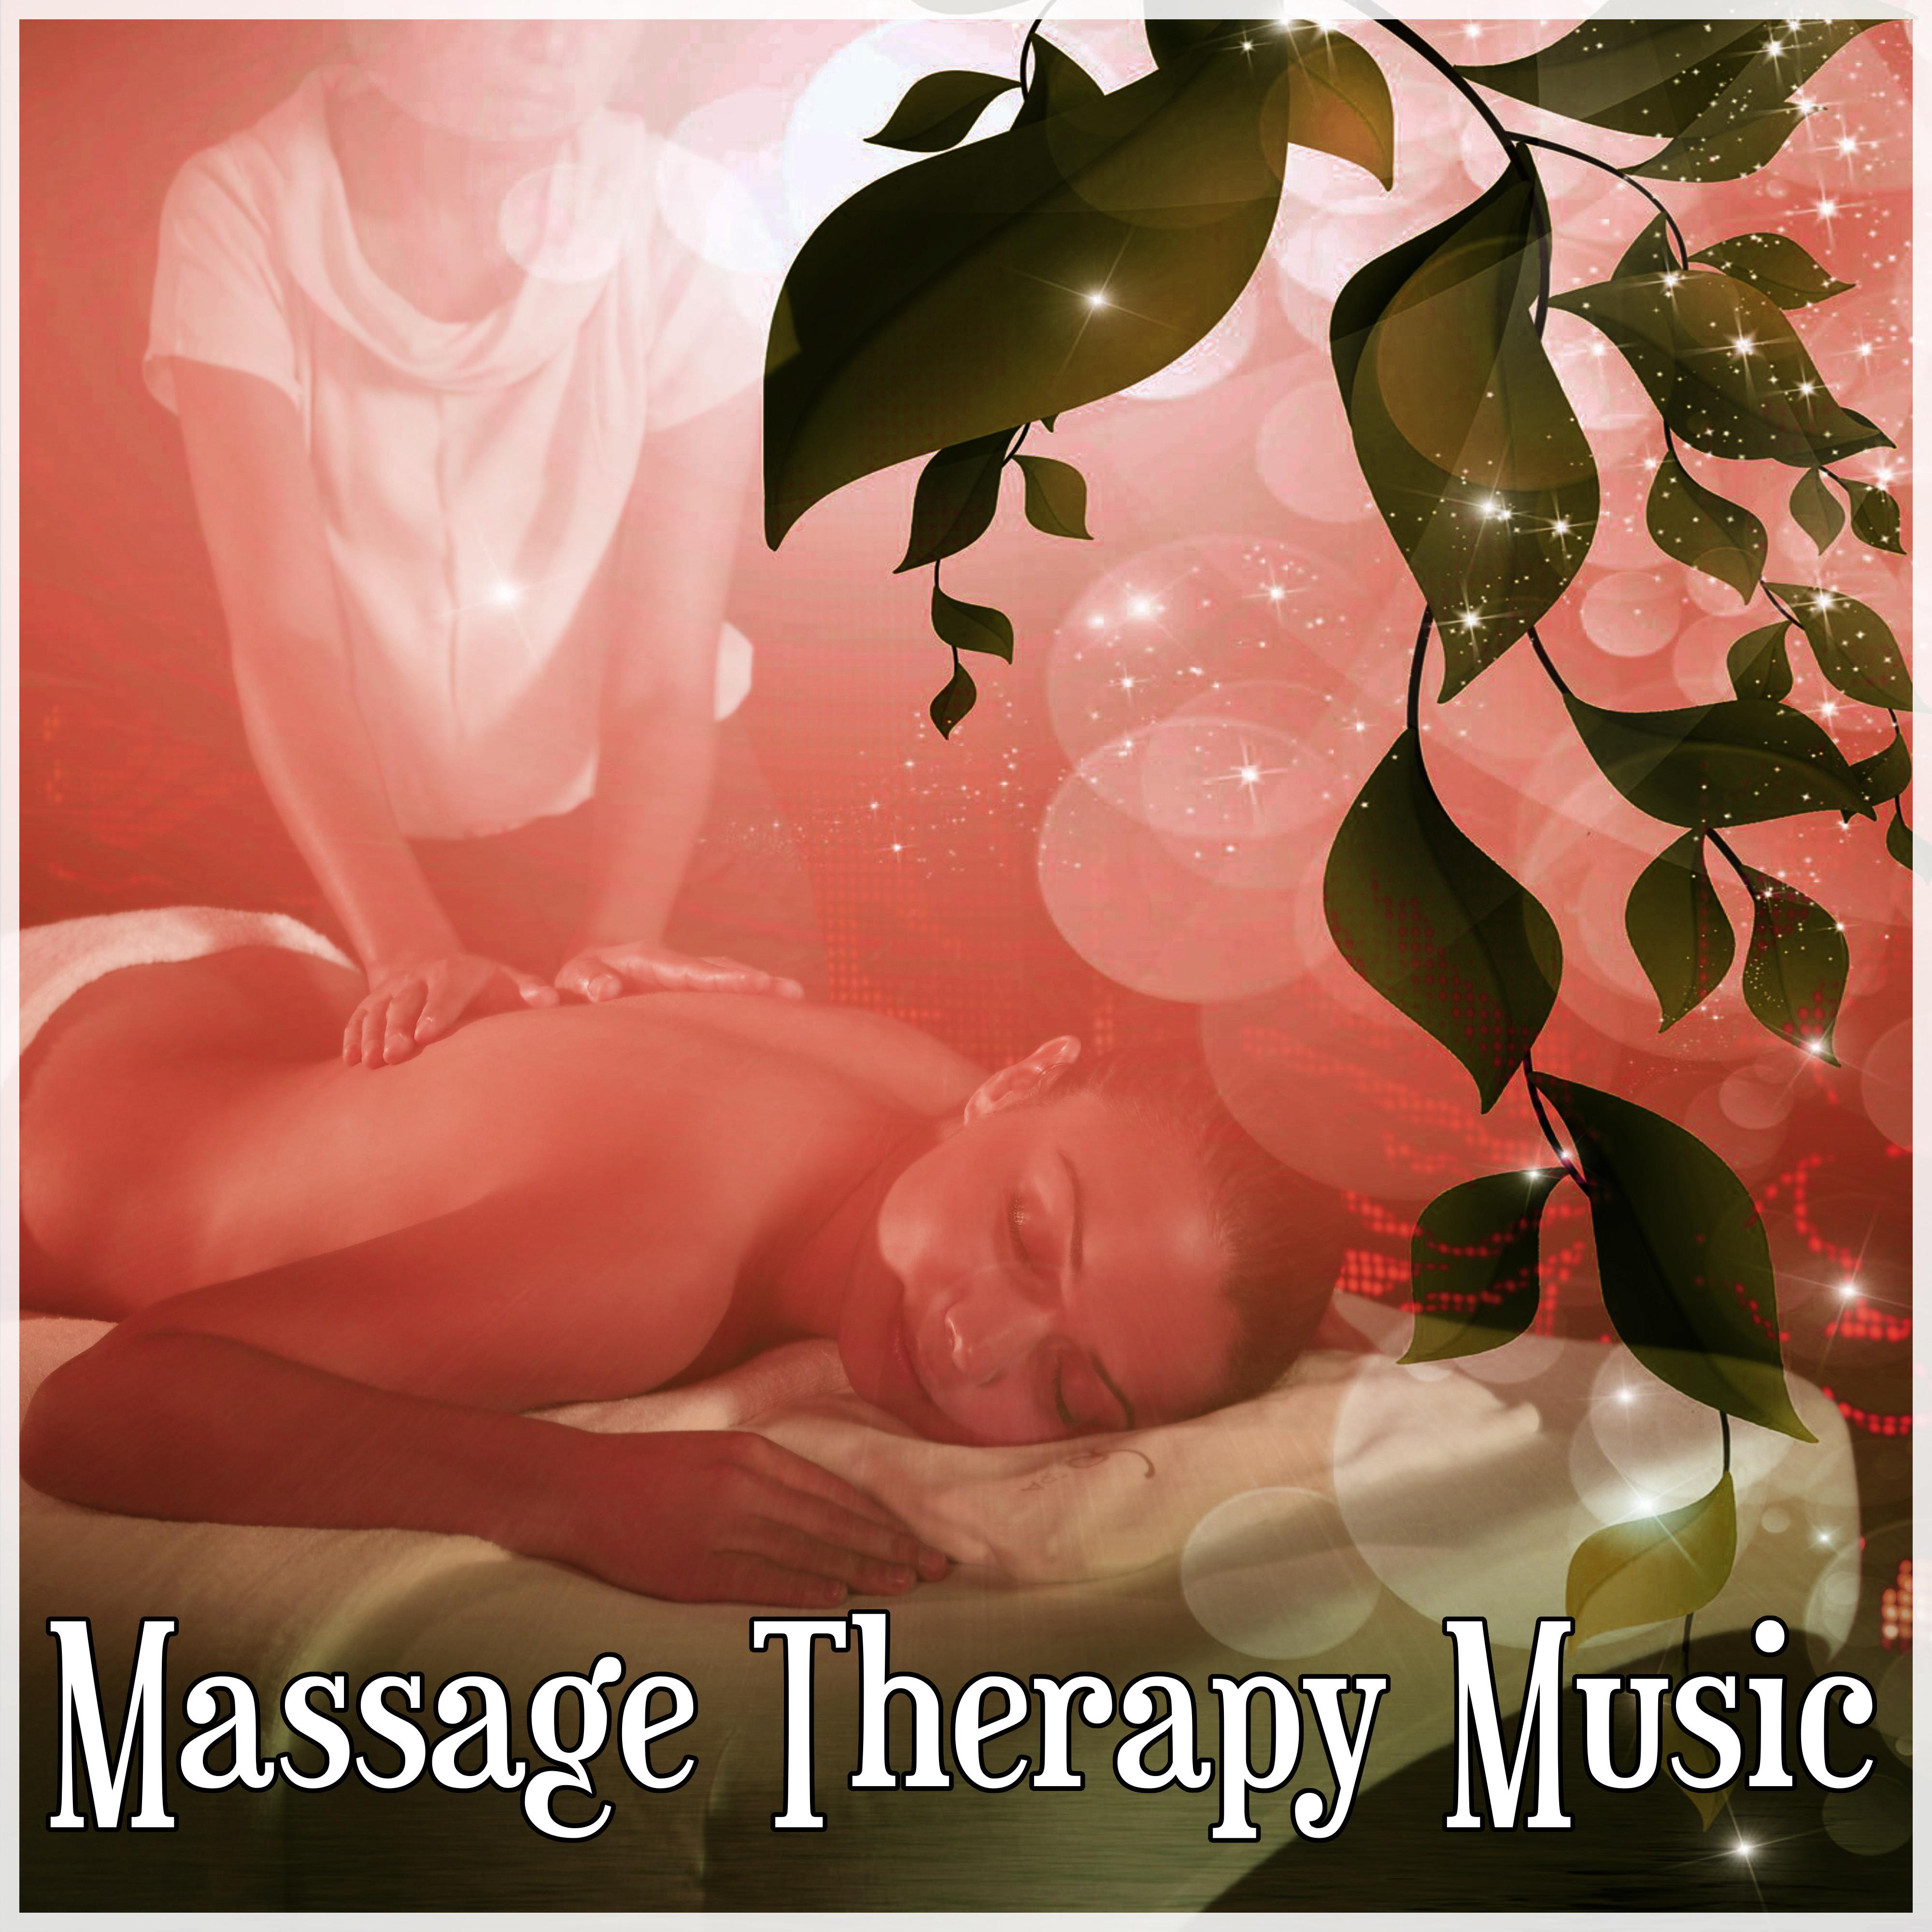 Massage Therapy Music – Nature Sounds, Pure Massage Relaxation, Massage Therapy, New Age, Lotus Flower